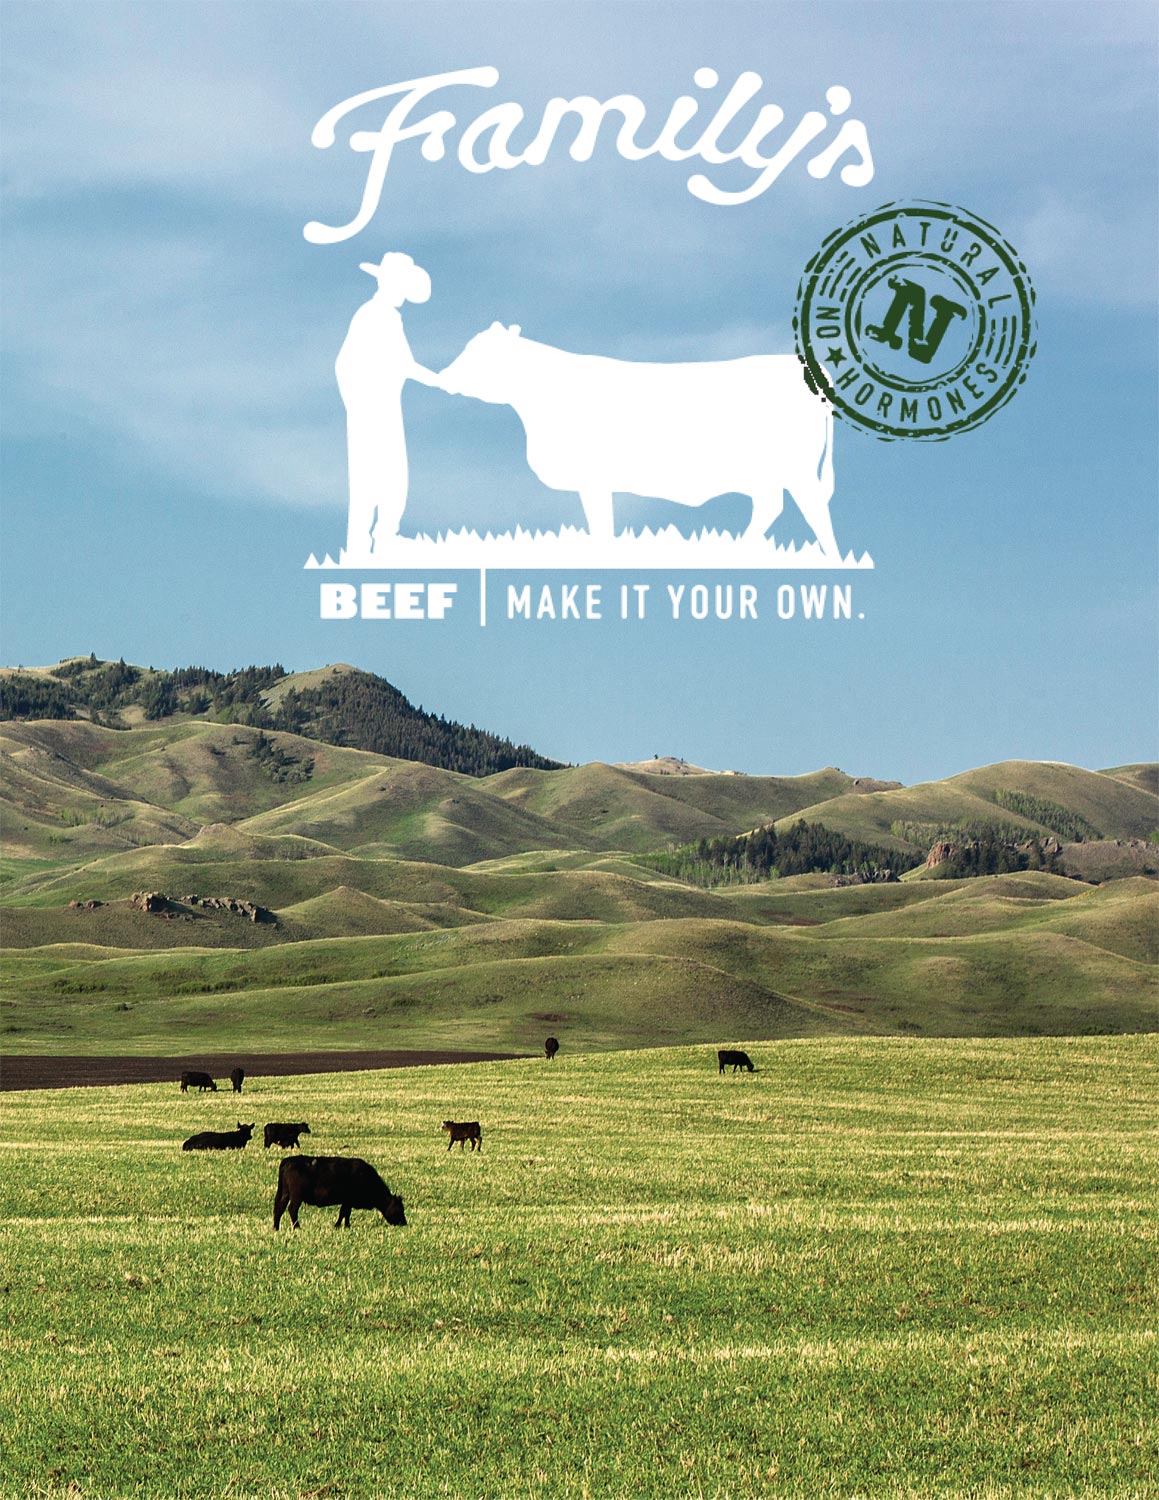 Montana-Ranching-Stock-Photography-Used-on-Cover-of-Agribusiness-Promotional-Piece